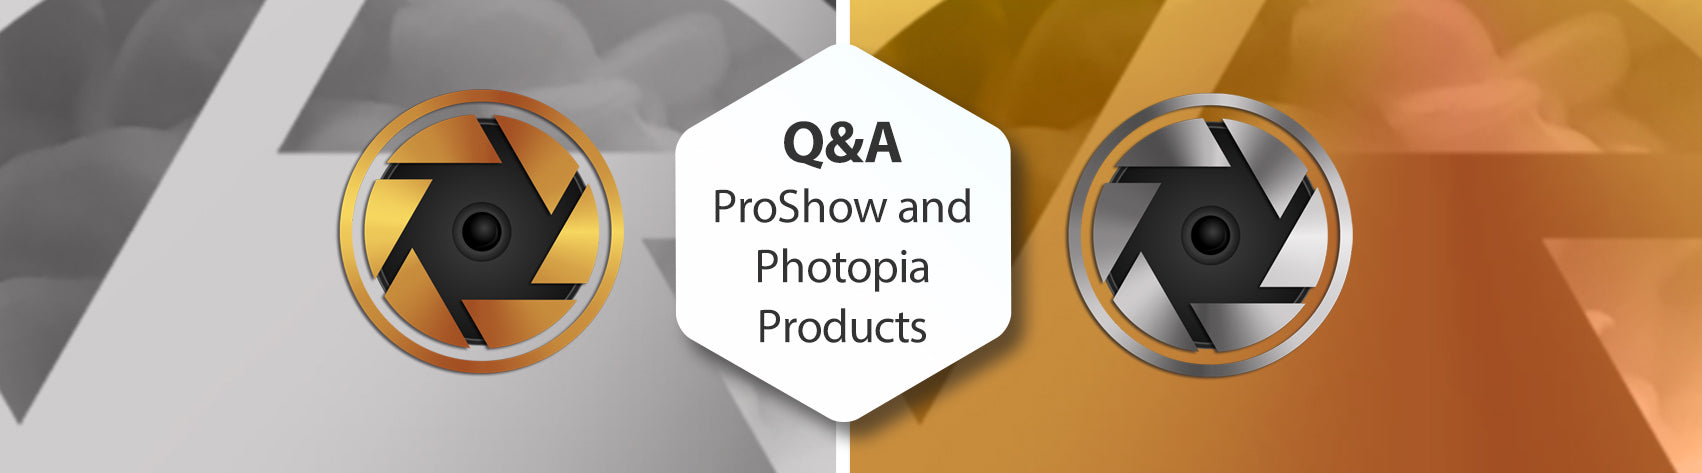 ProShow and Photopia Products